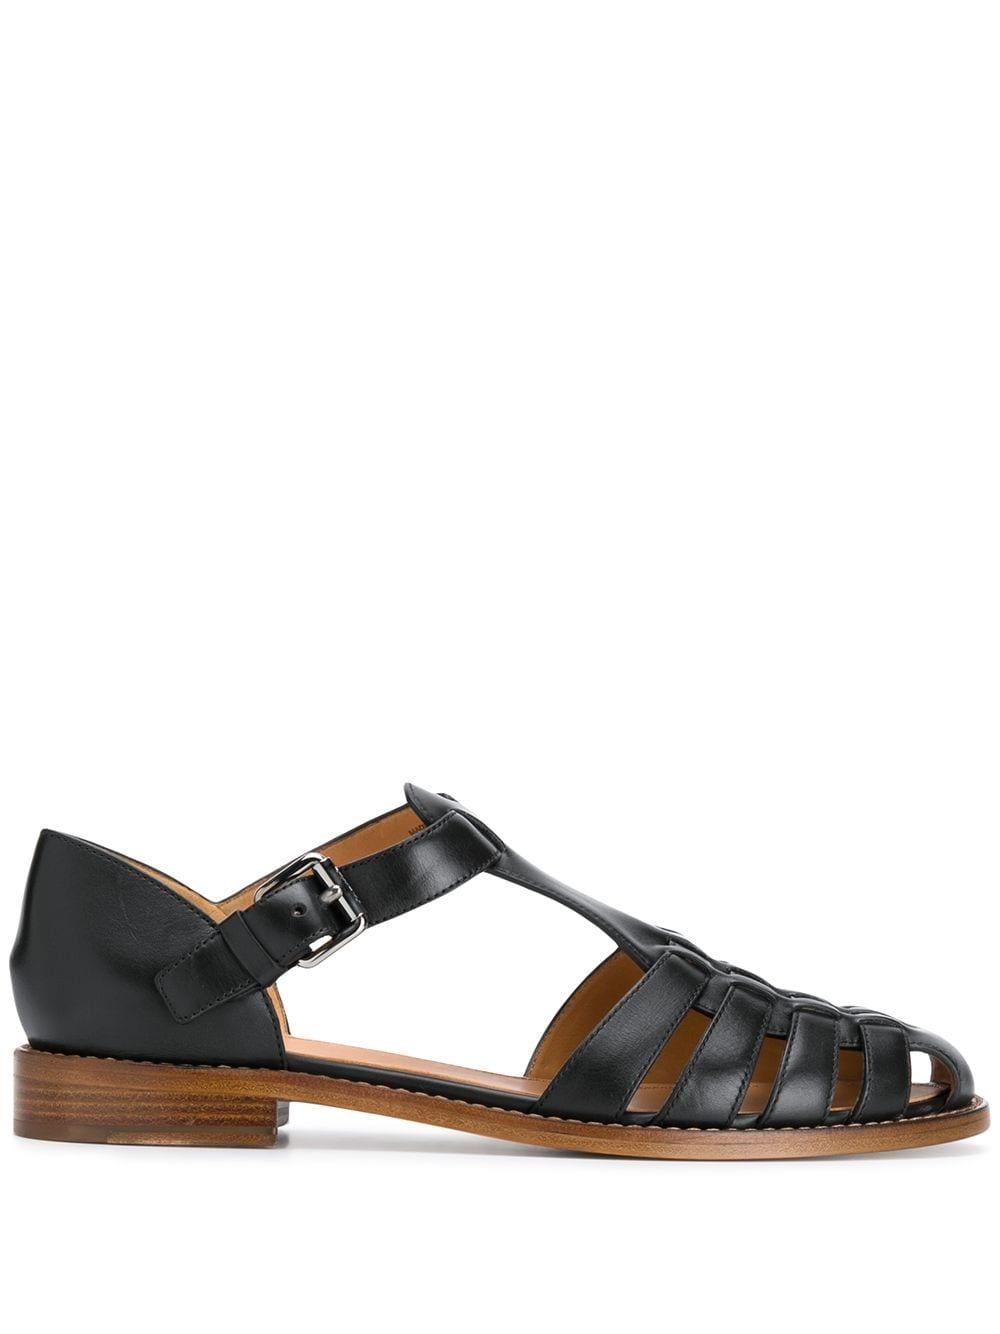 Church's Kelsey Leather Sandals in Black - Lyst